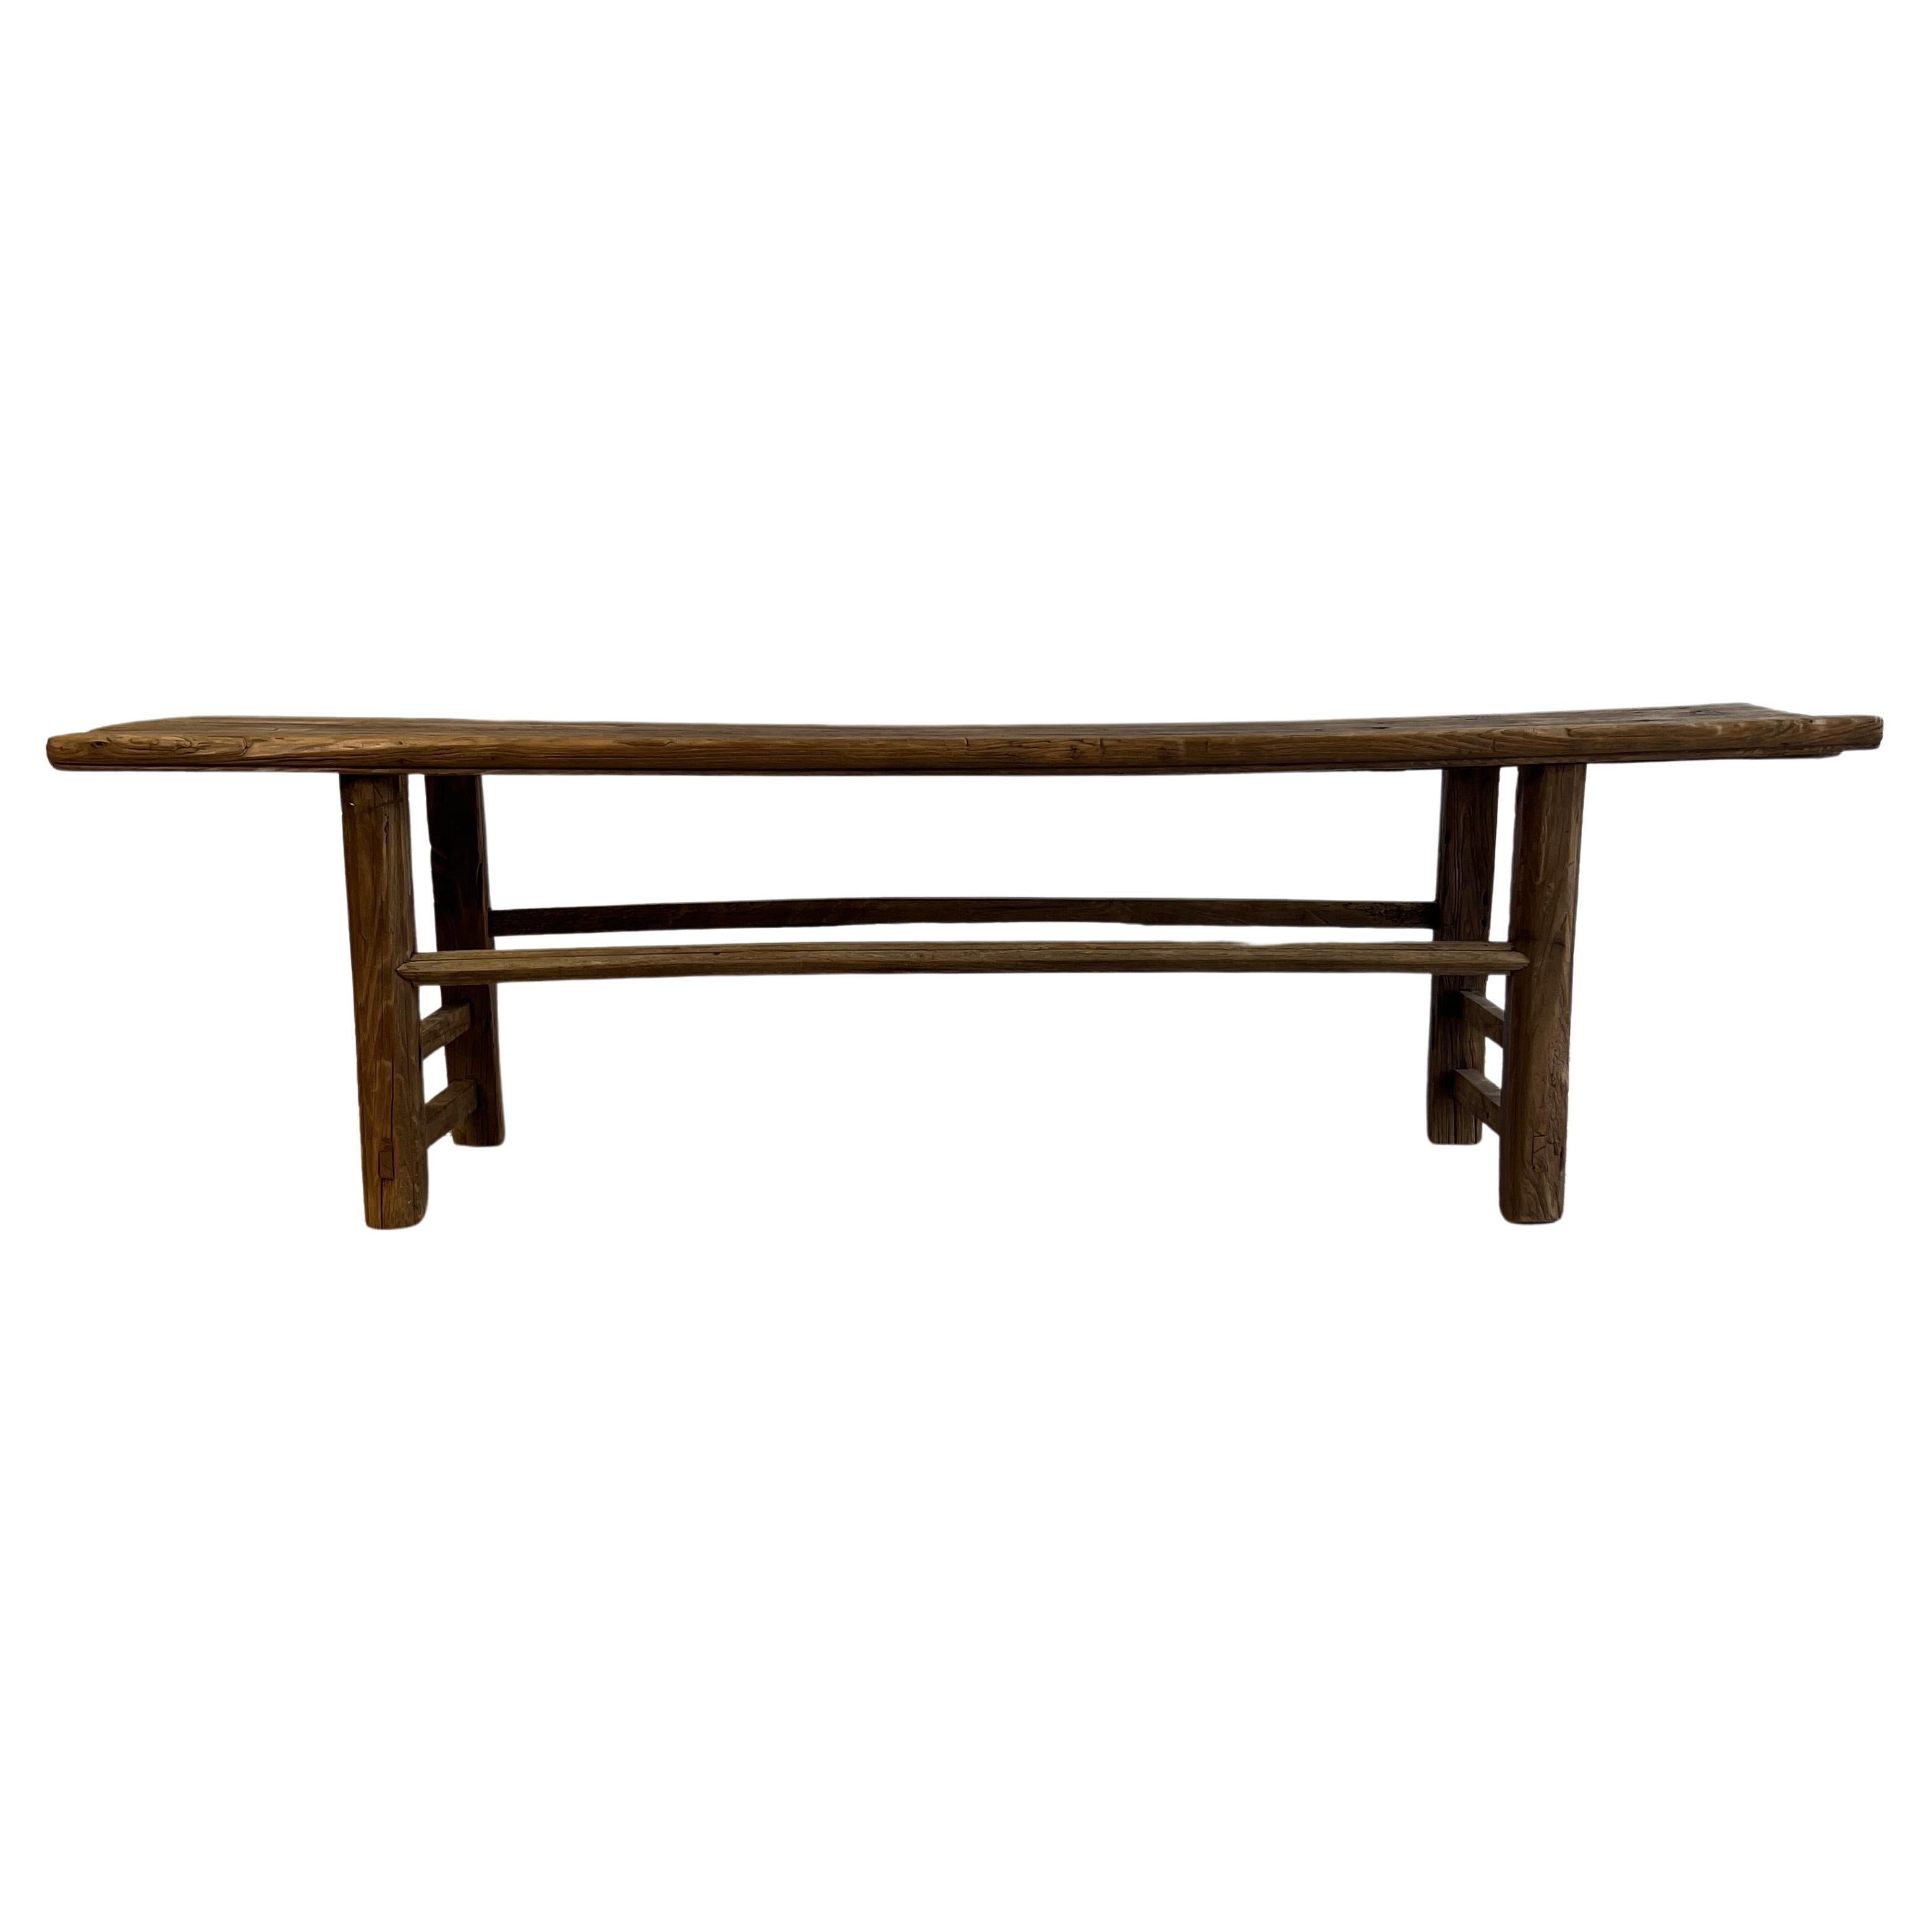 Elm Wood Wide Seat Bench or Coffee Table